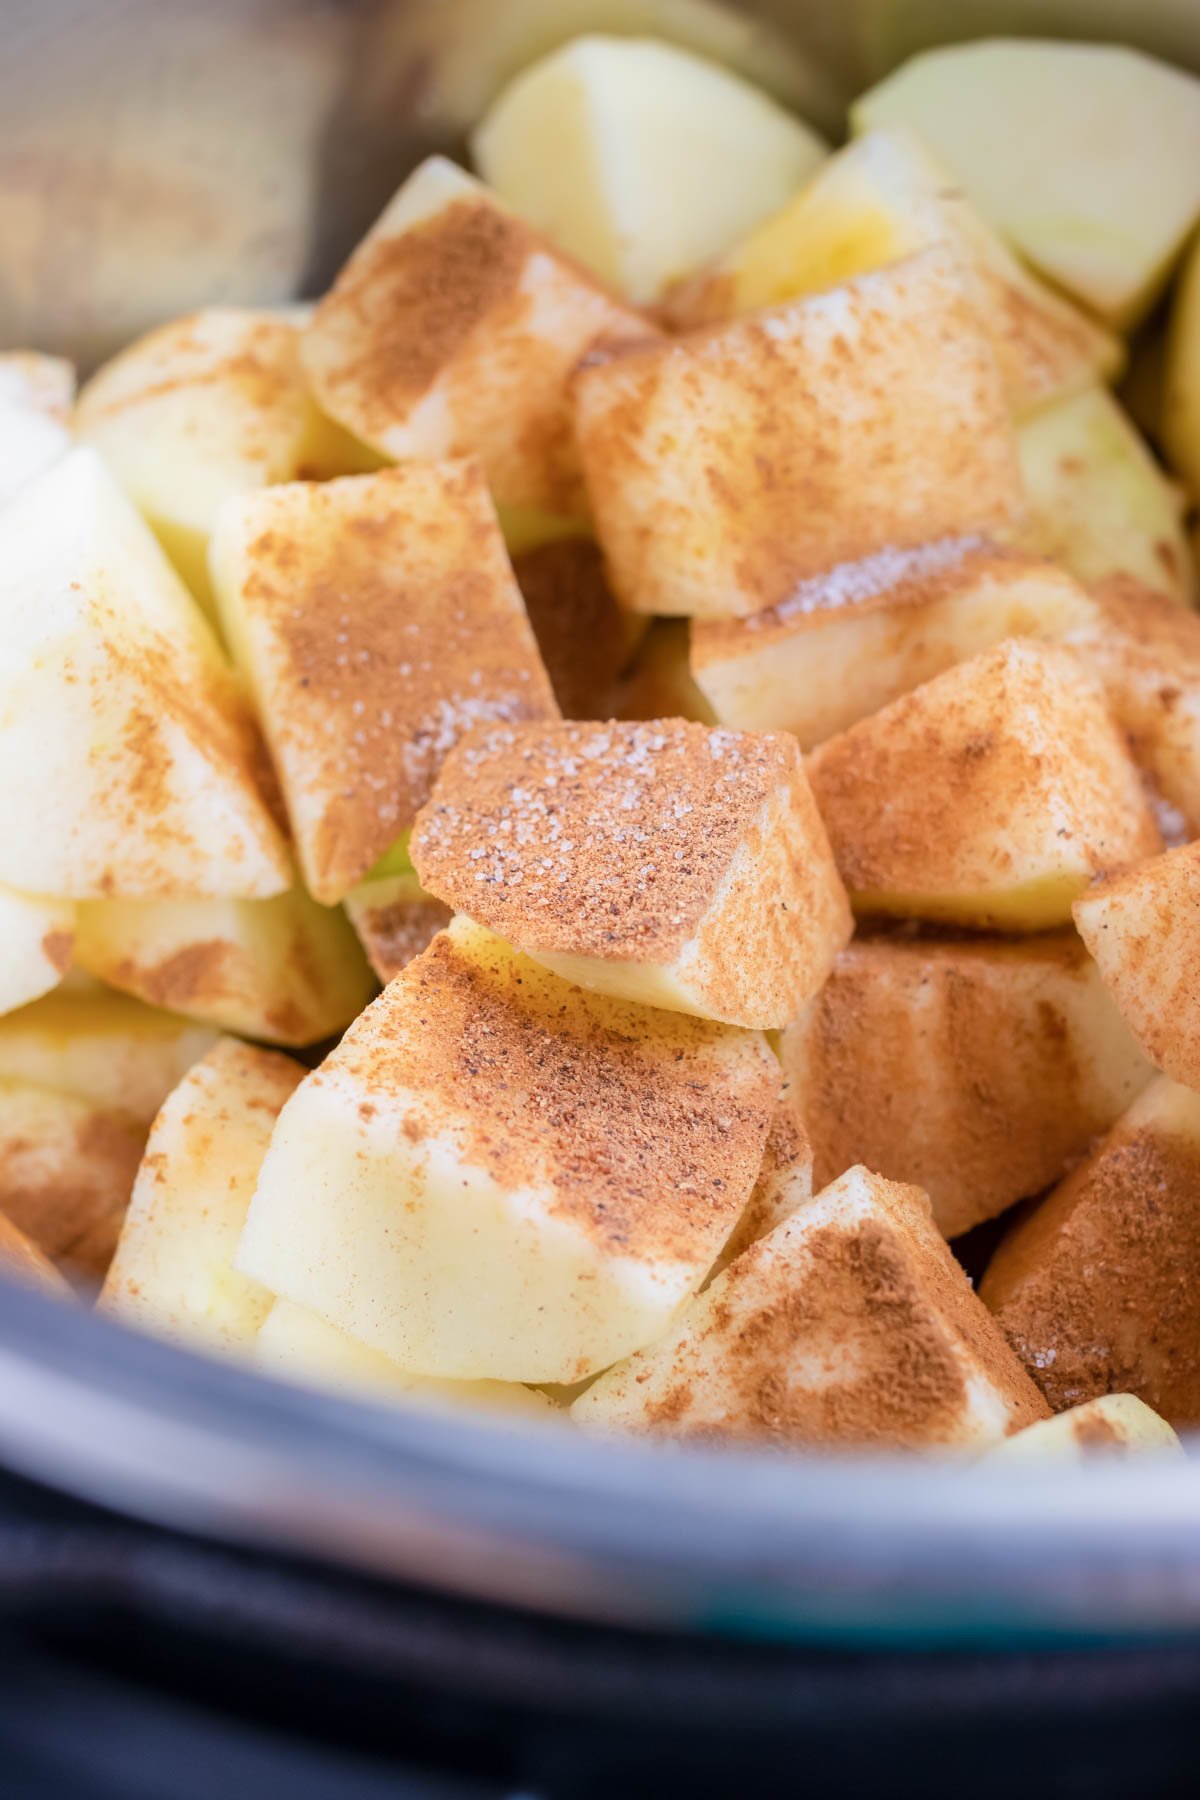 Apples are covered in cinnamon and spice in this no sugar, homemade applesauce.